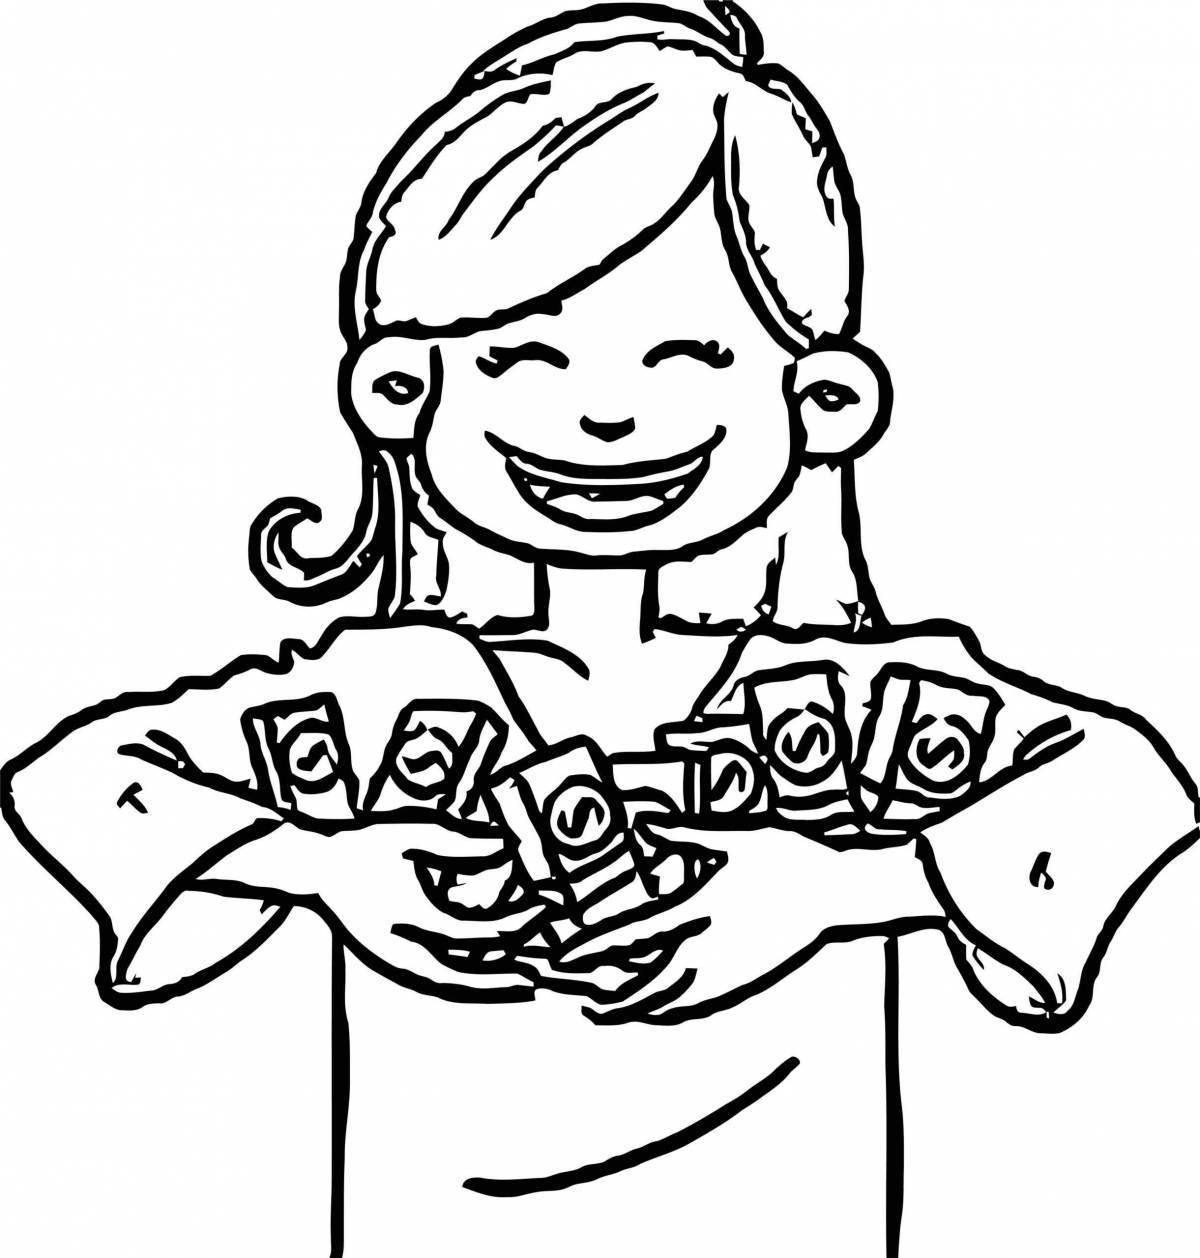 Primary school financial literacy bright coloring page